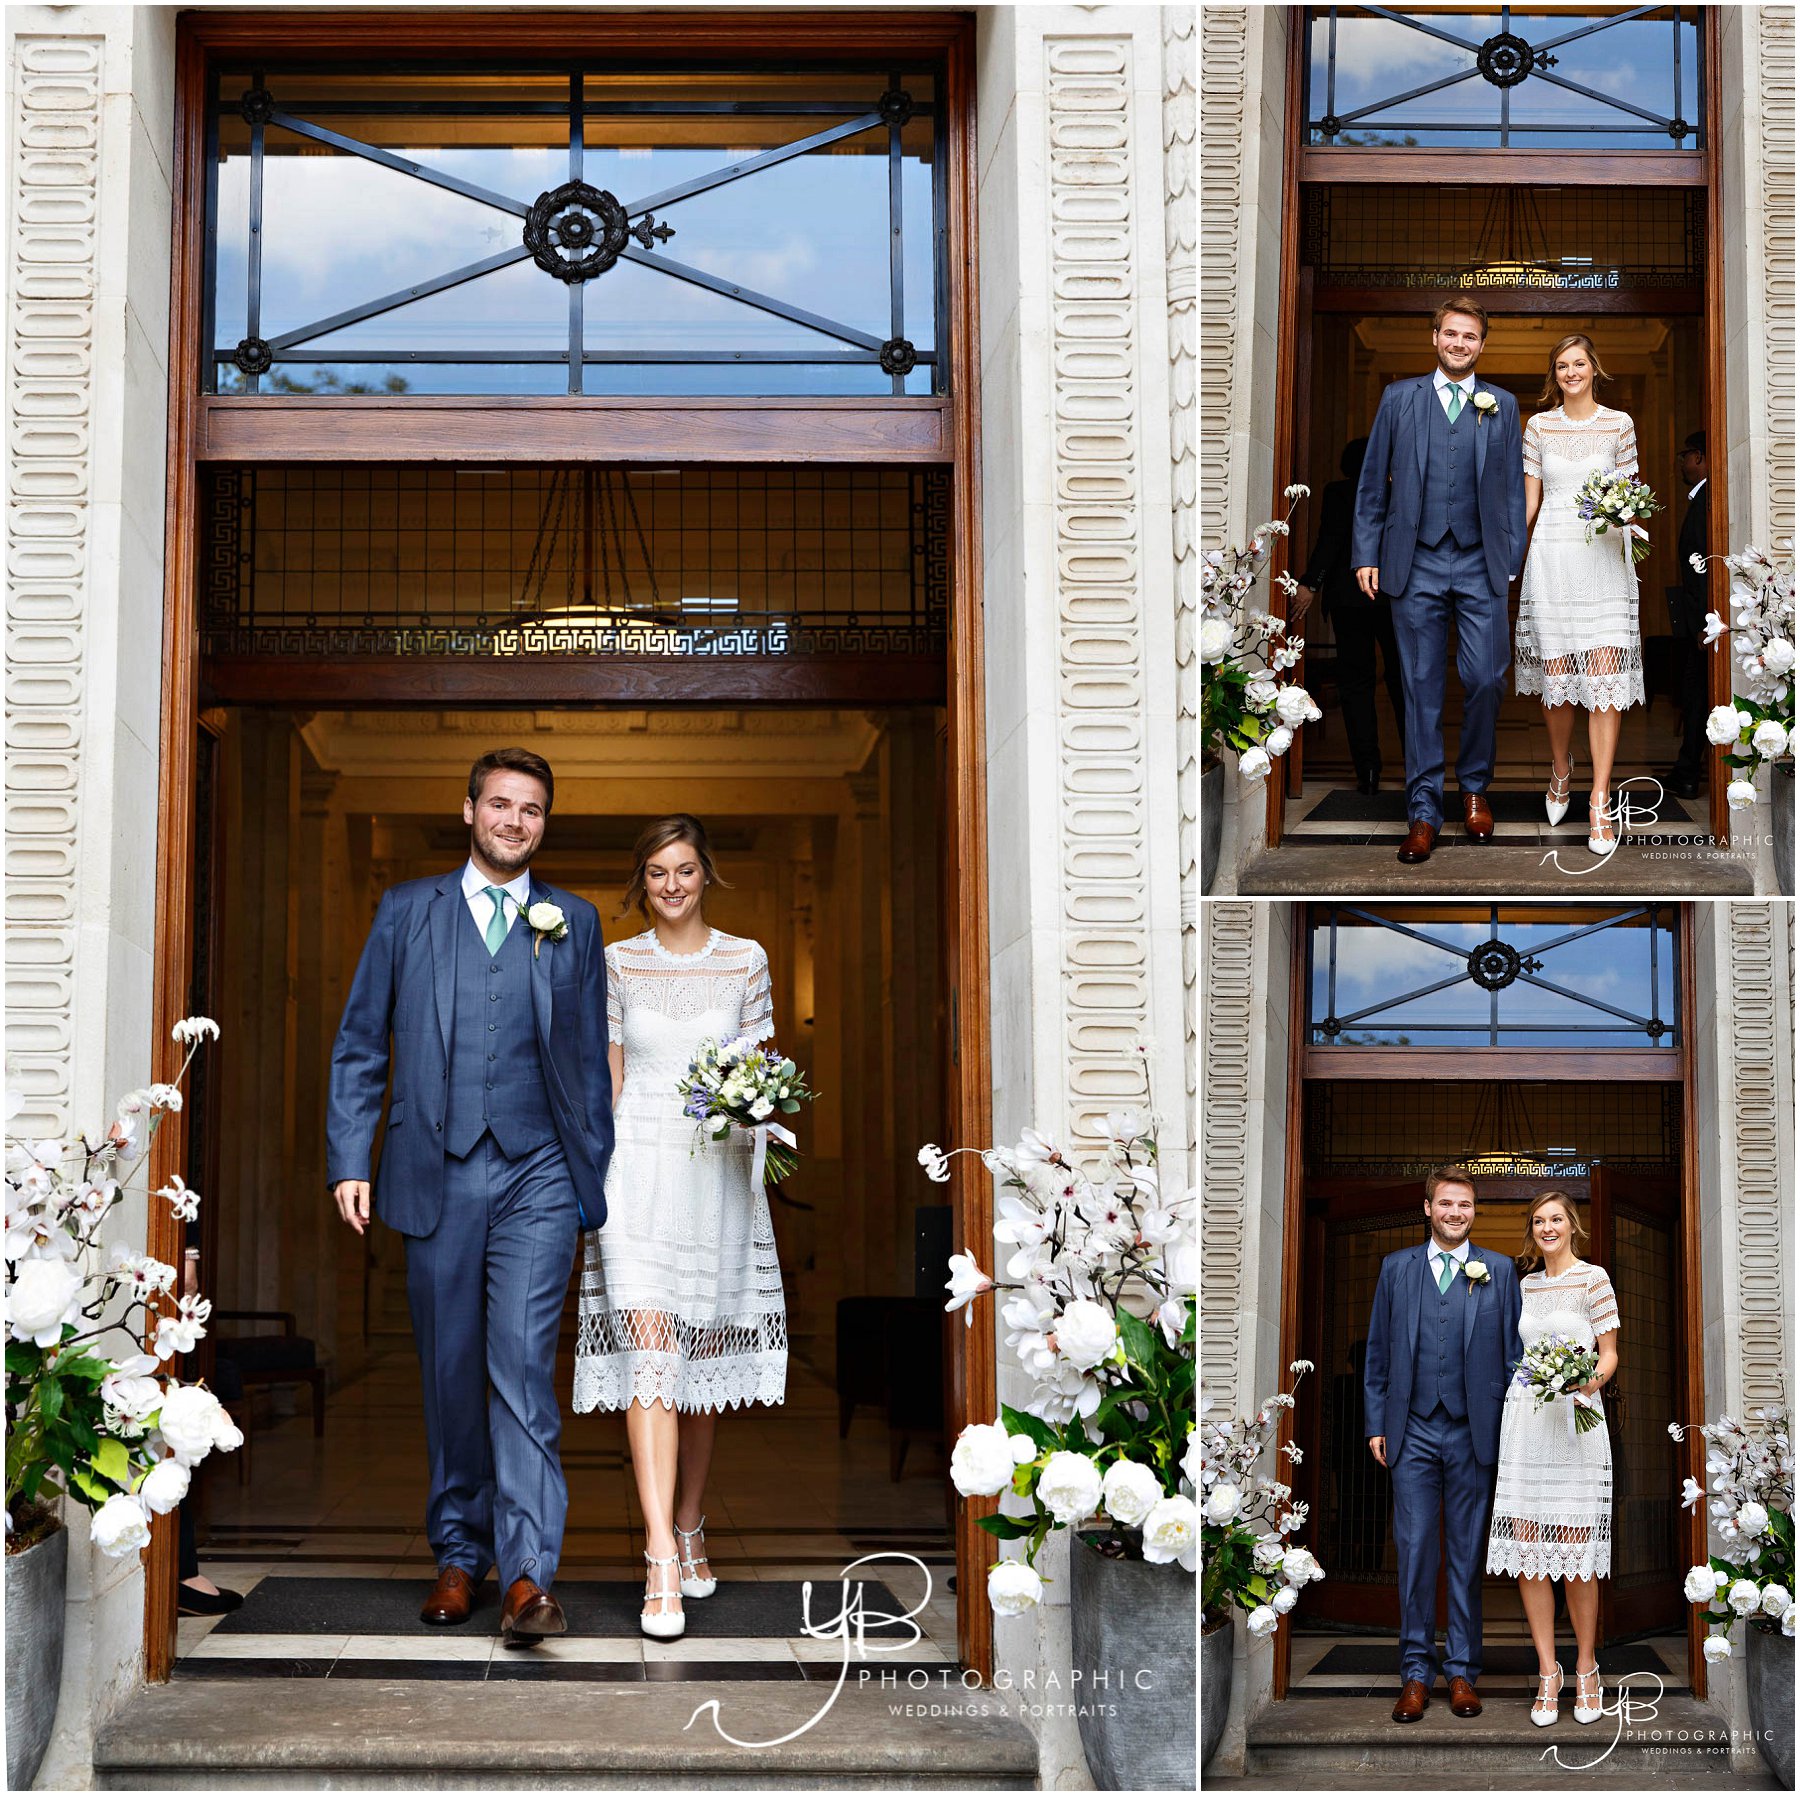 Wedding Portraits at The Old Marylebone Town Hall by YBPHOTOGRAPHIC